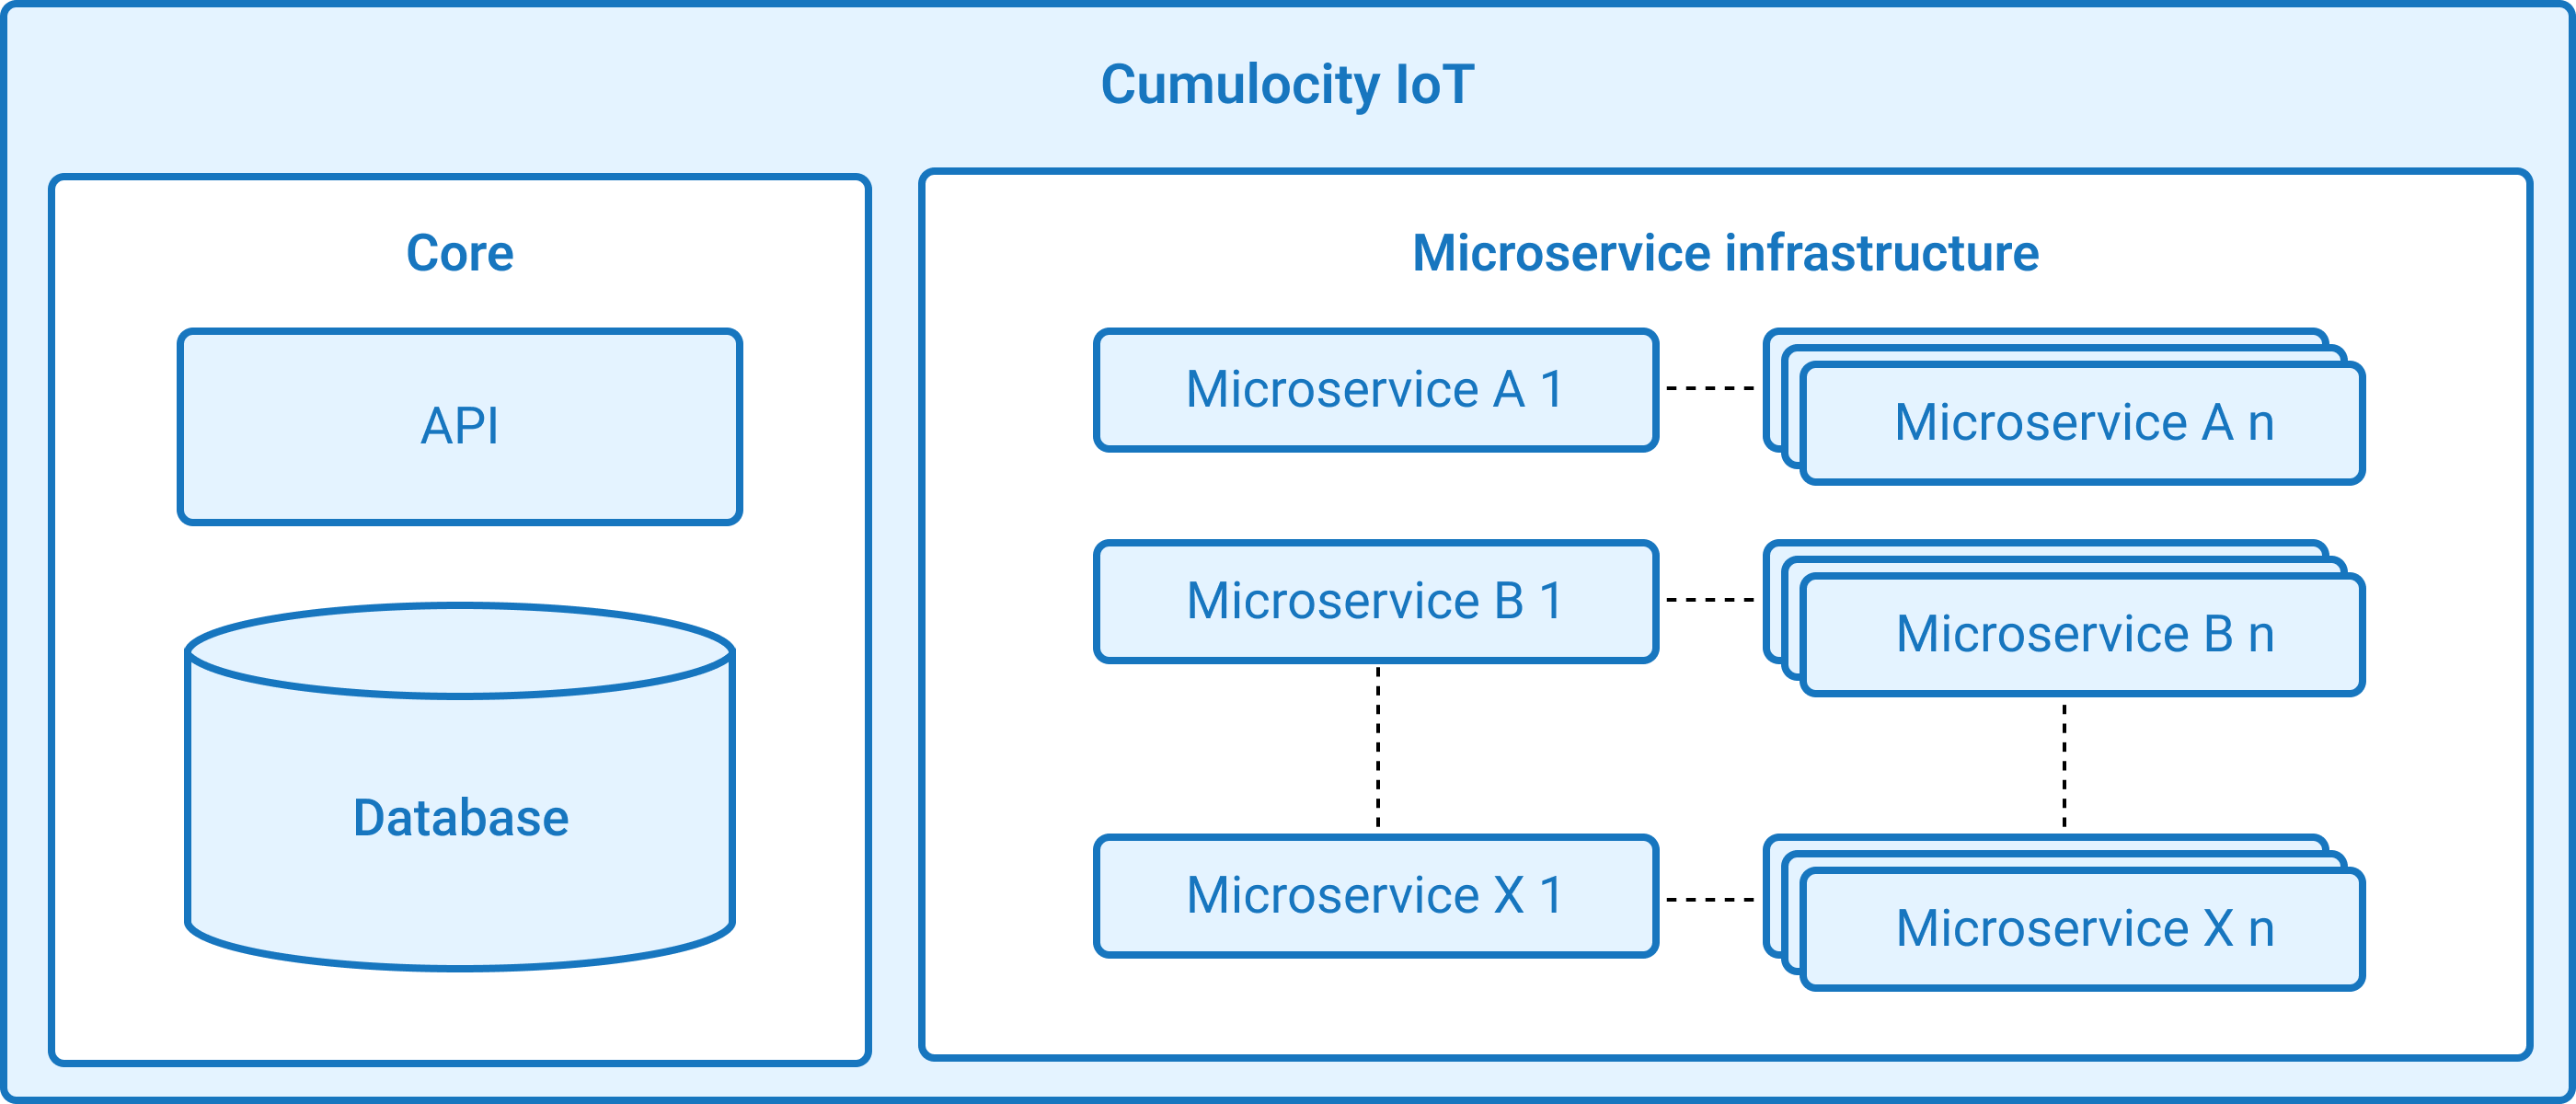 Microservice infrastructure